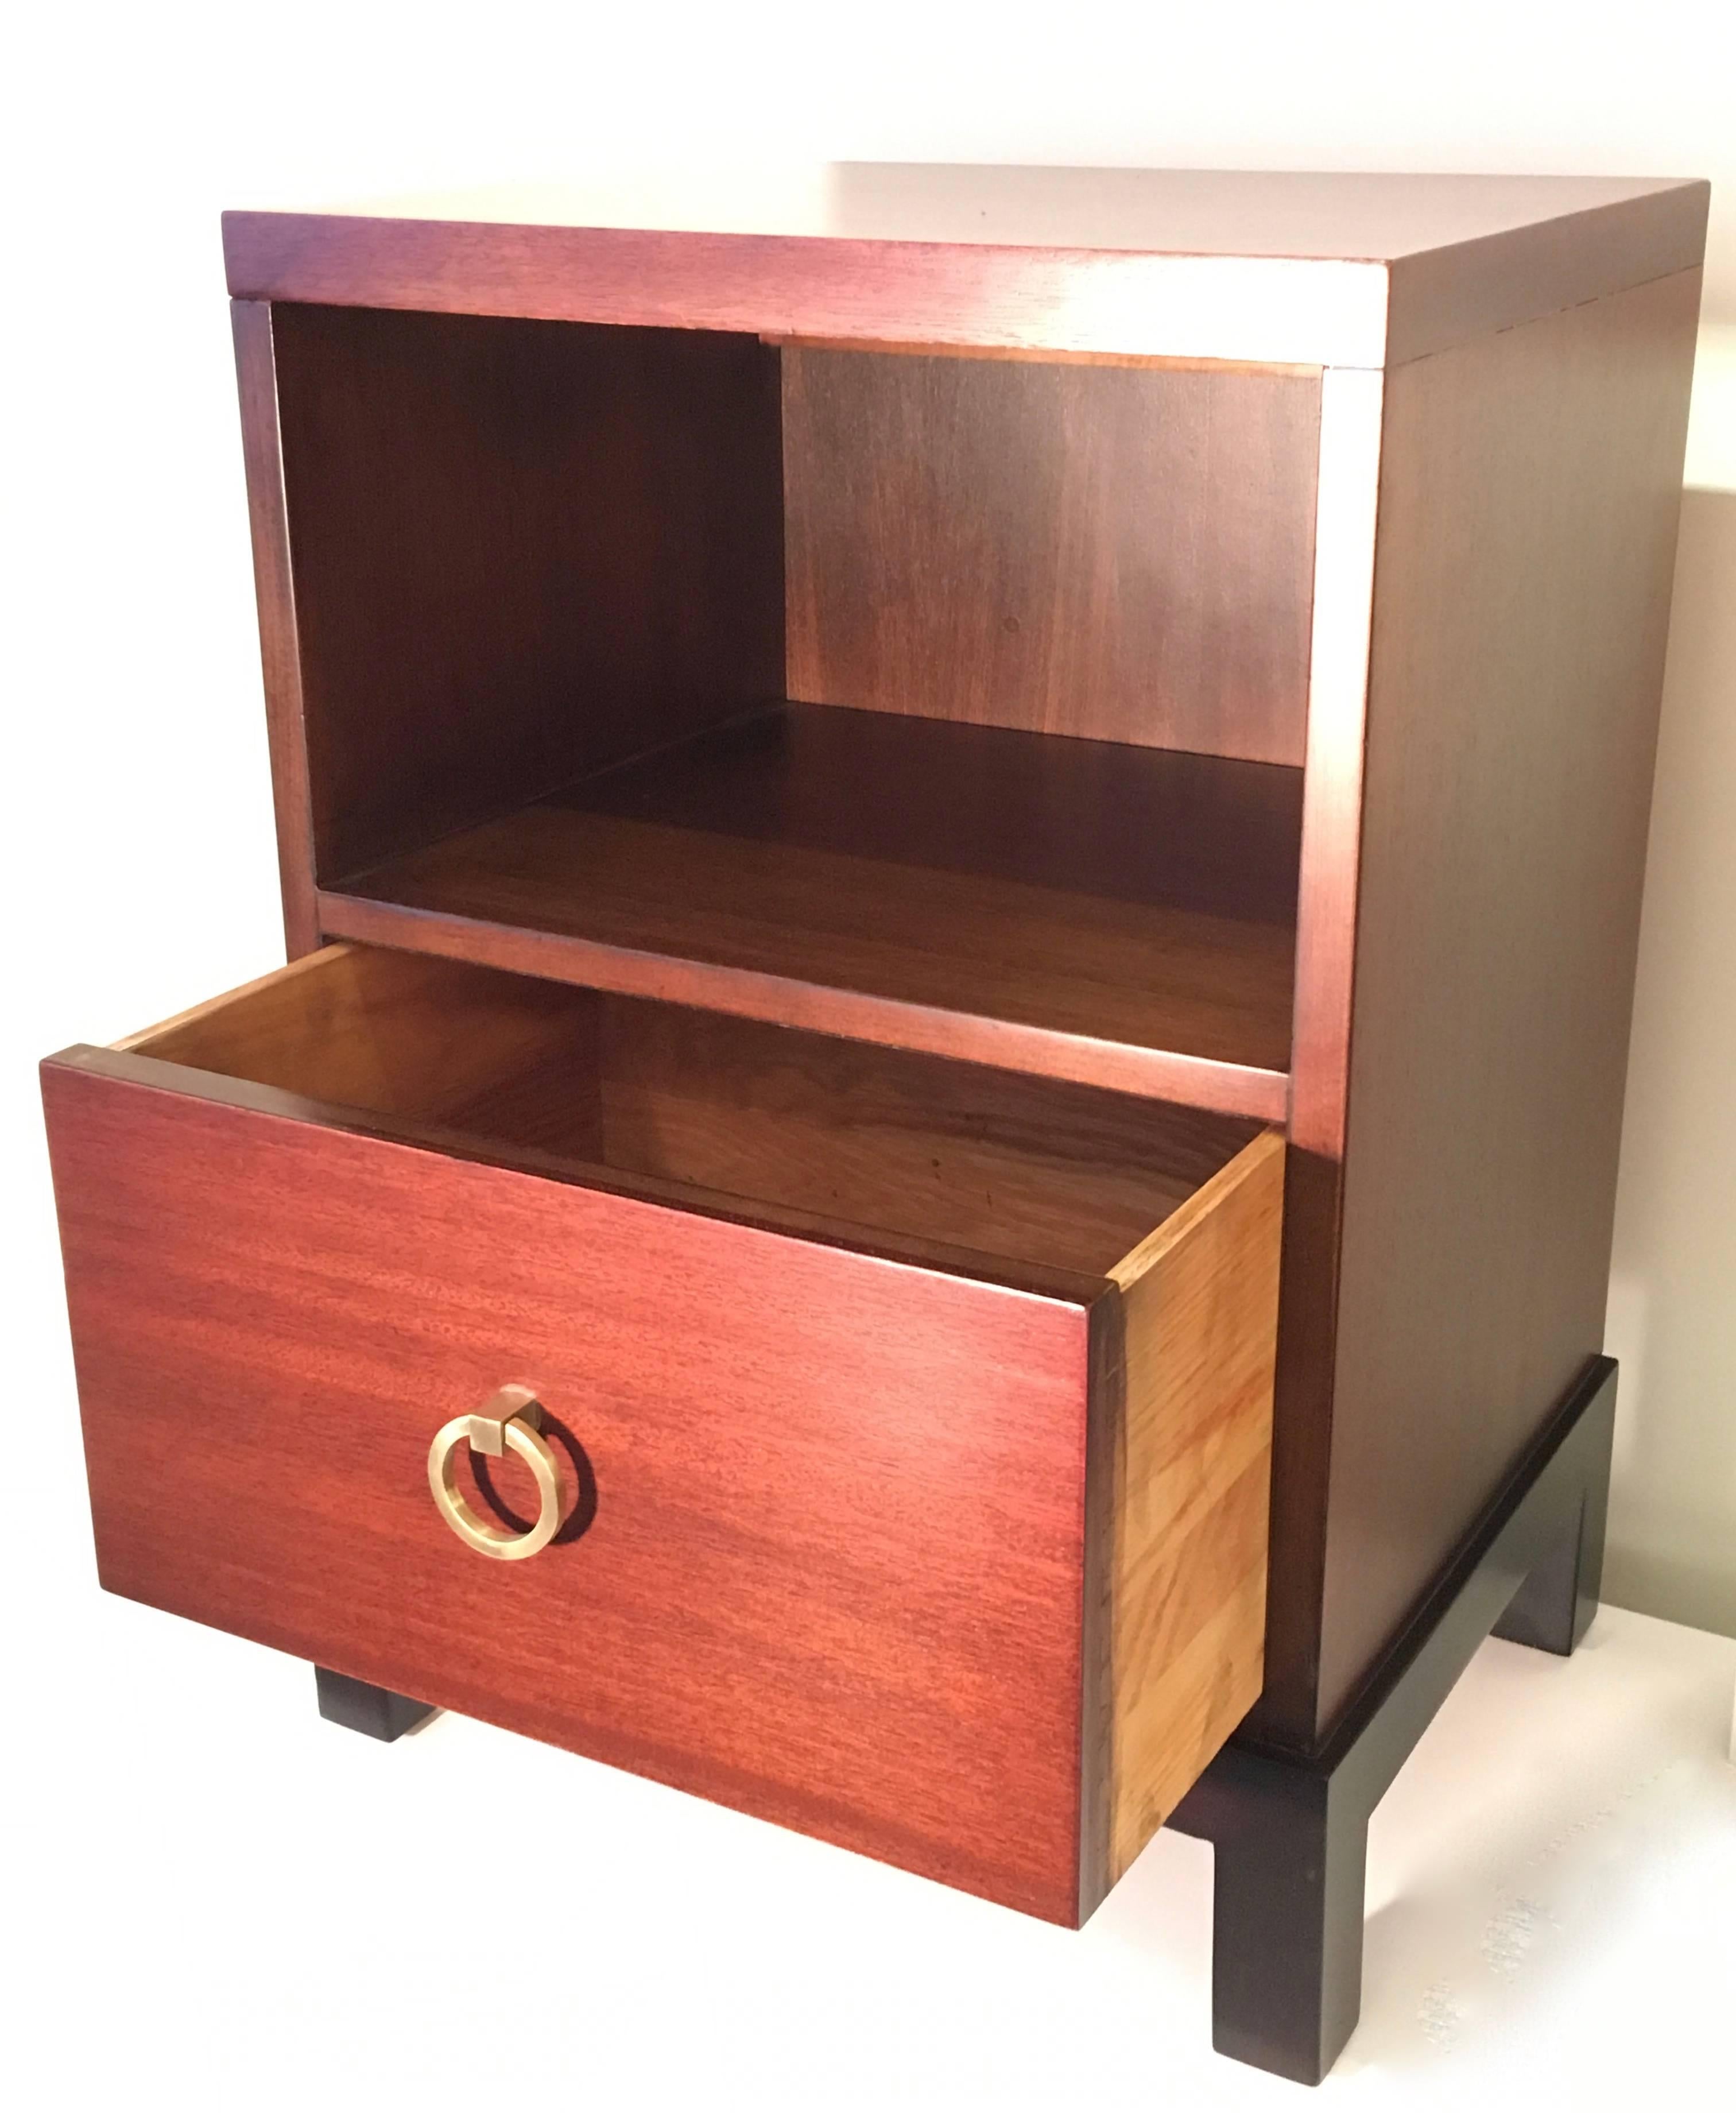 A very handsome and stately pair of nightstands or end tables refinished in a rich walnut stain. The cabinets are supported on plinths that have been lacquered in espresso and each stand is accented with Robsjohn-Gibbings' signature polished brass